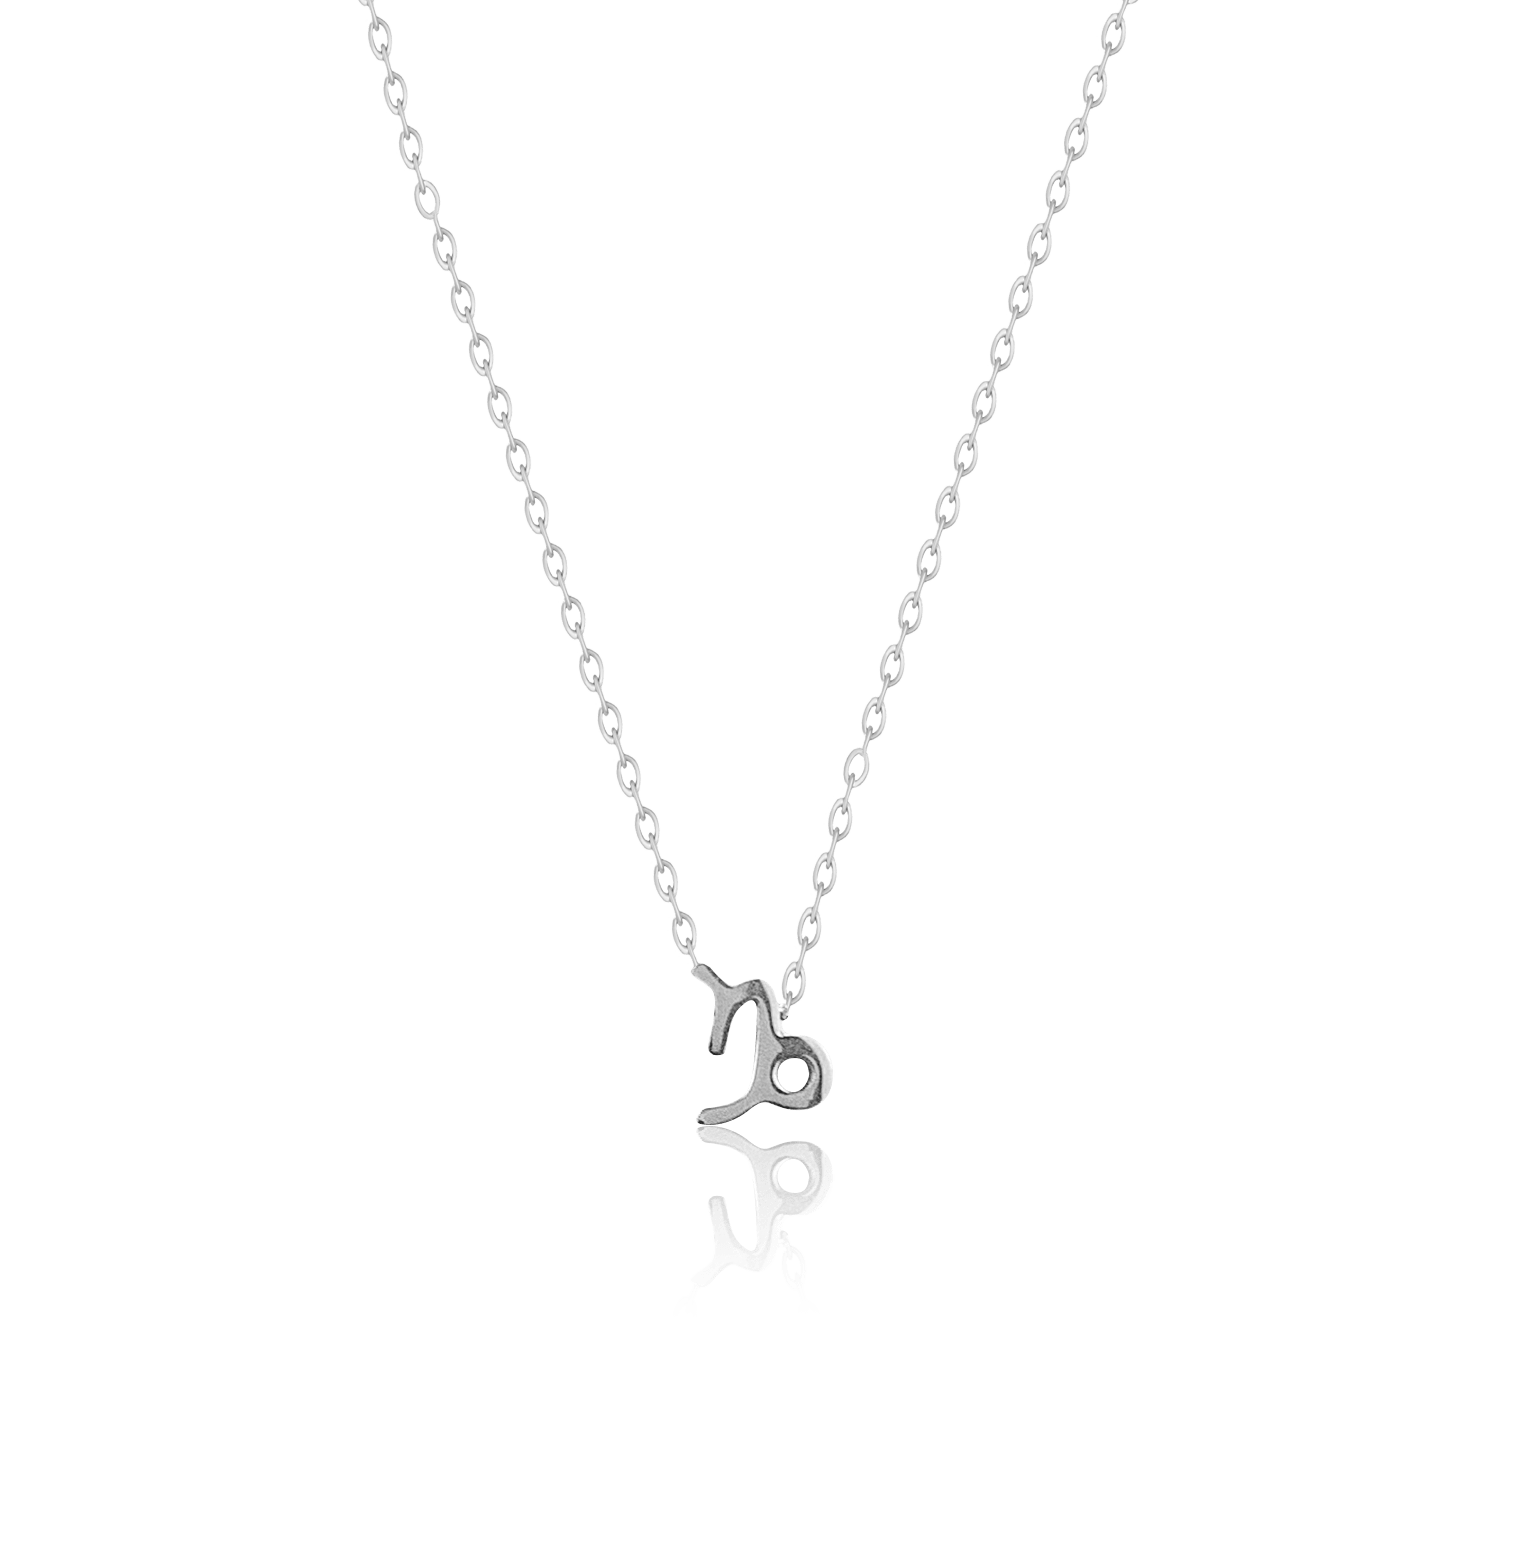 bianco rosso Necklaces Silver Capricorn - Necklace cyprus greece jewelry gift free shipping europe worldwide